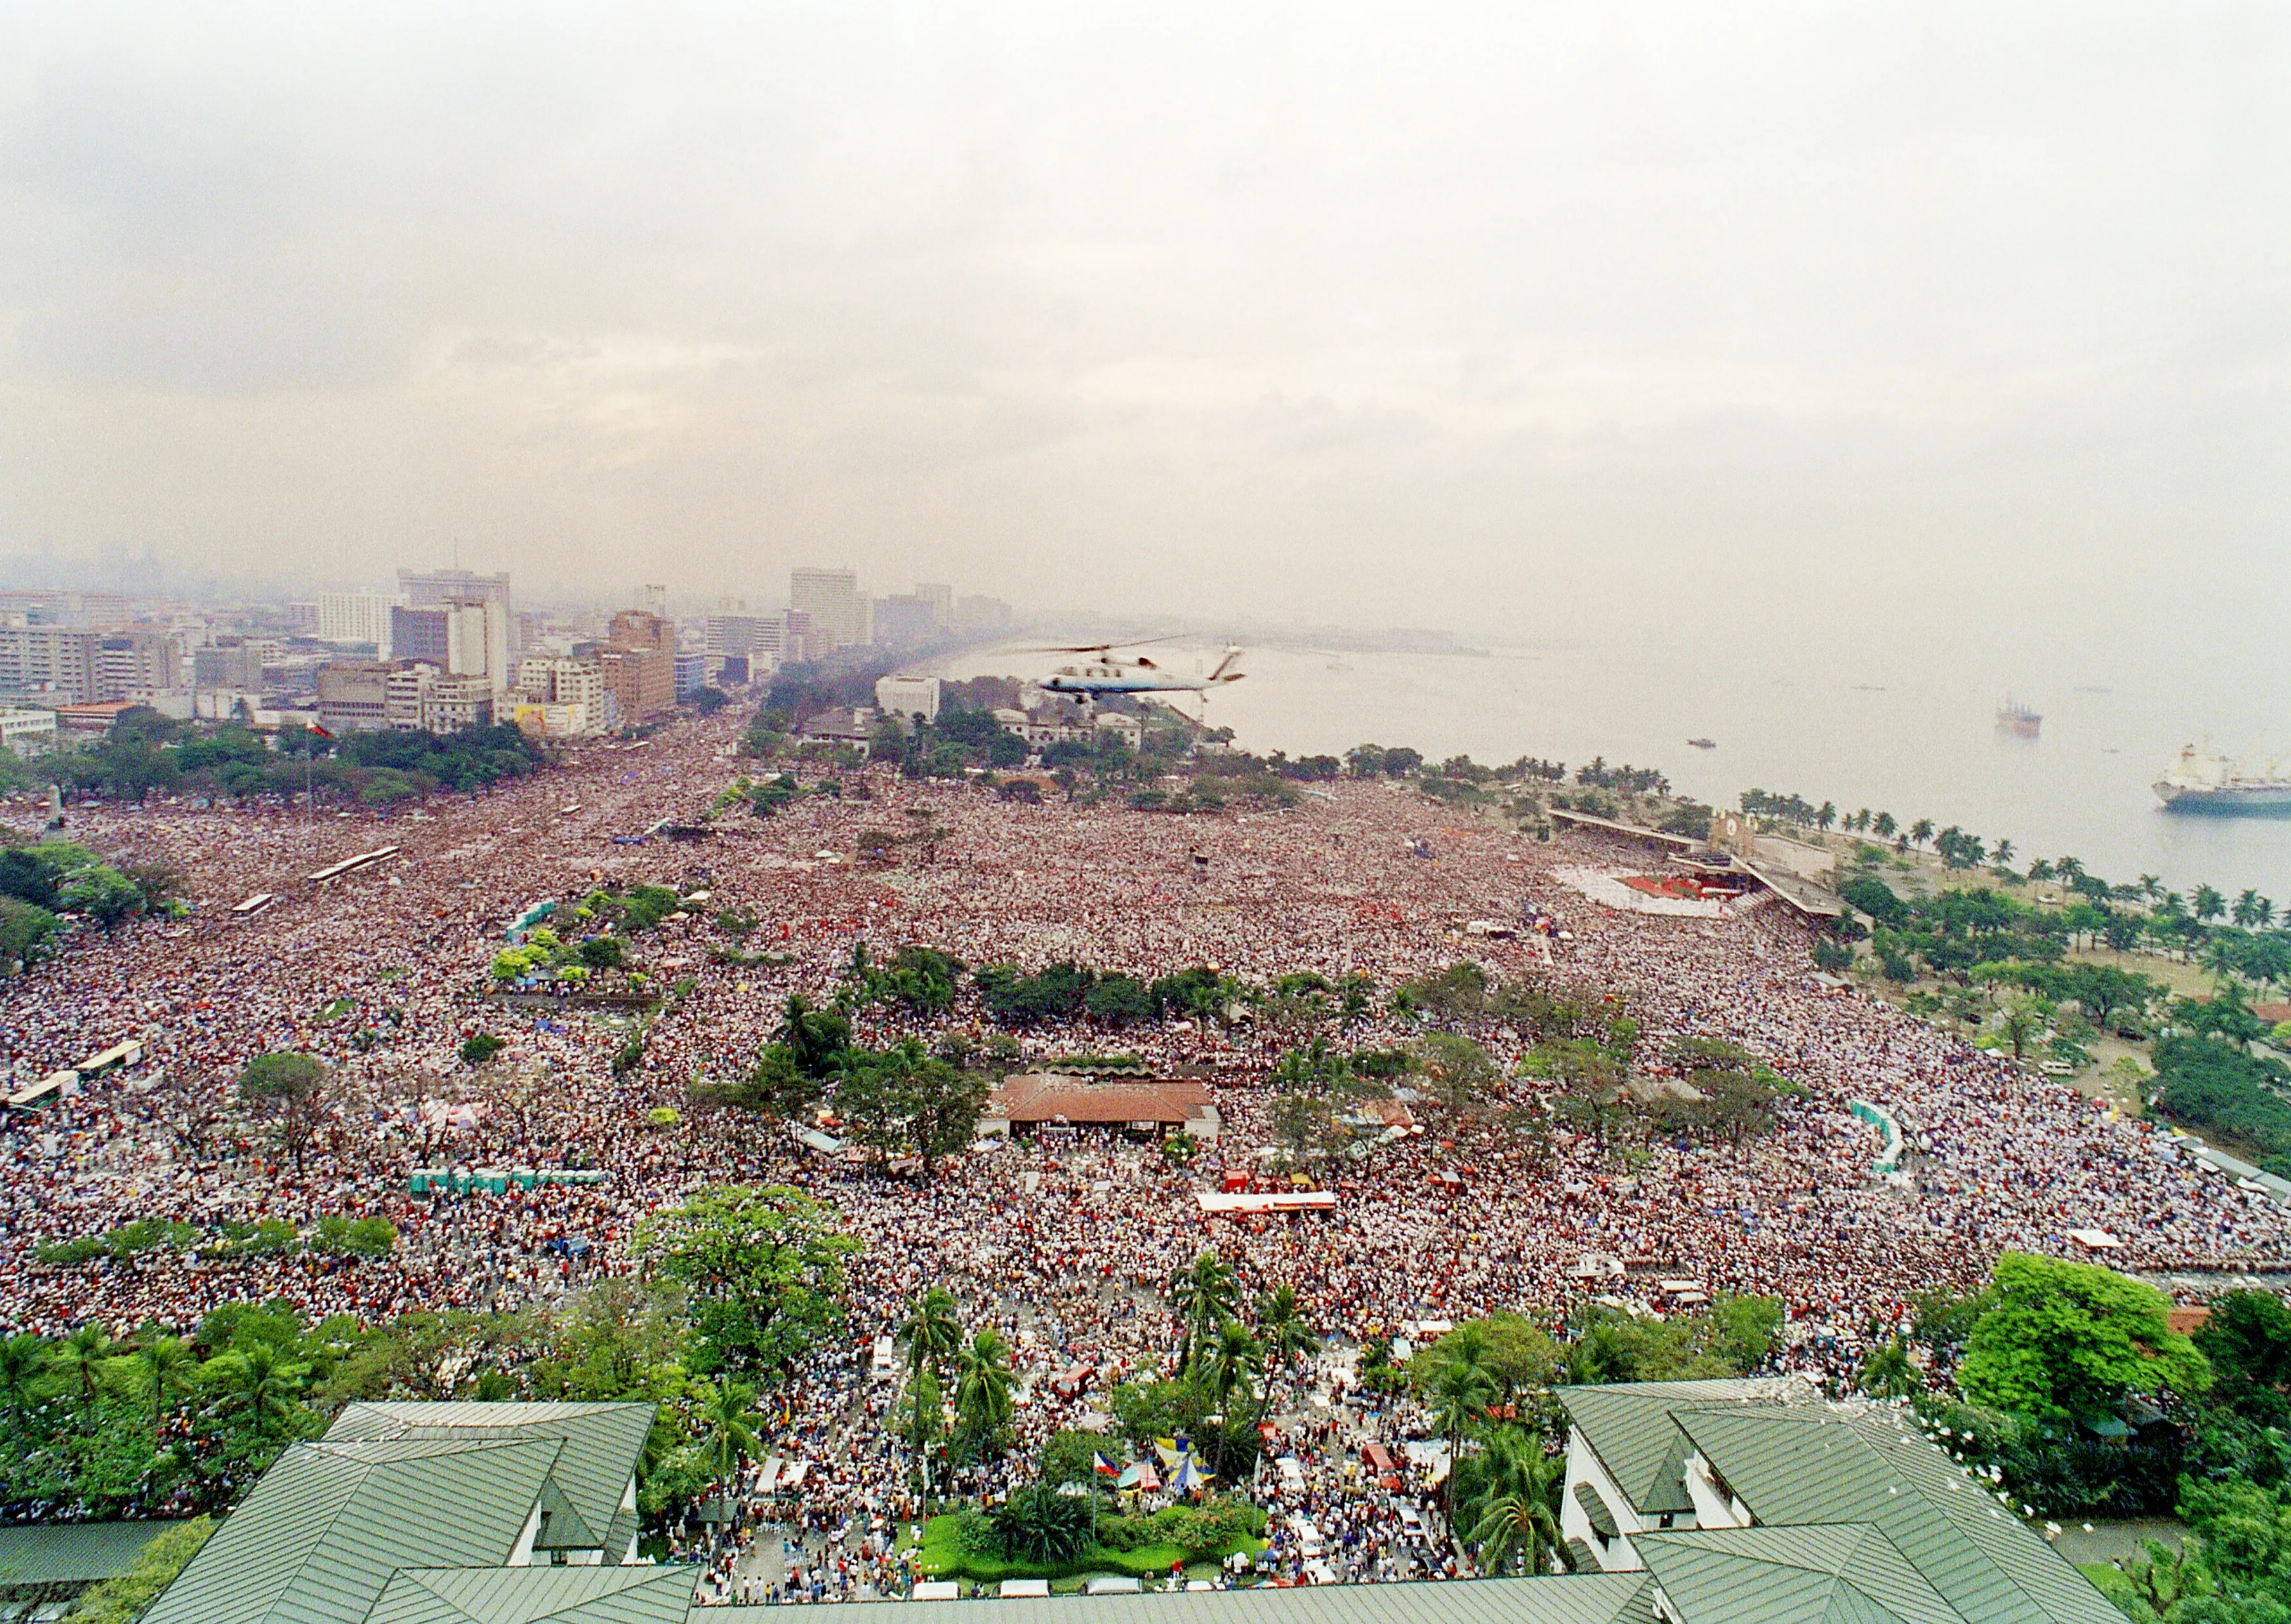 Pope John Paul II's helicopter flies over the huge crowd in Manila's Luneta Park prior to celebrating an open-air mass for an estimated two-million people gathered for the 10th World Youth Day on Jan. 15, 1995.?w=200&h=150